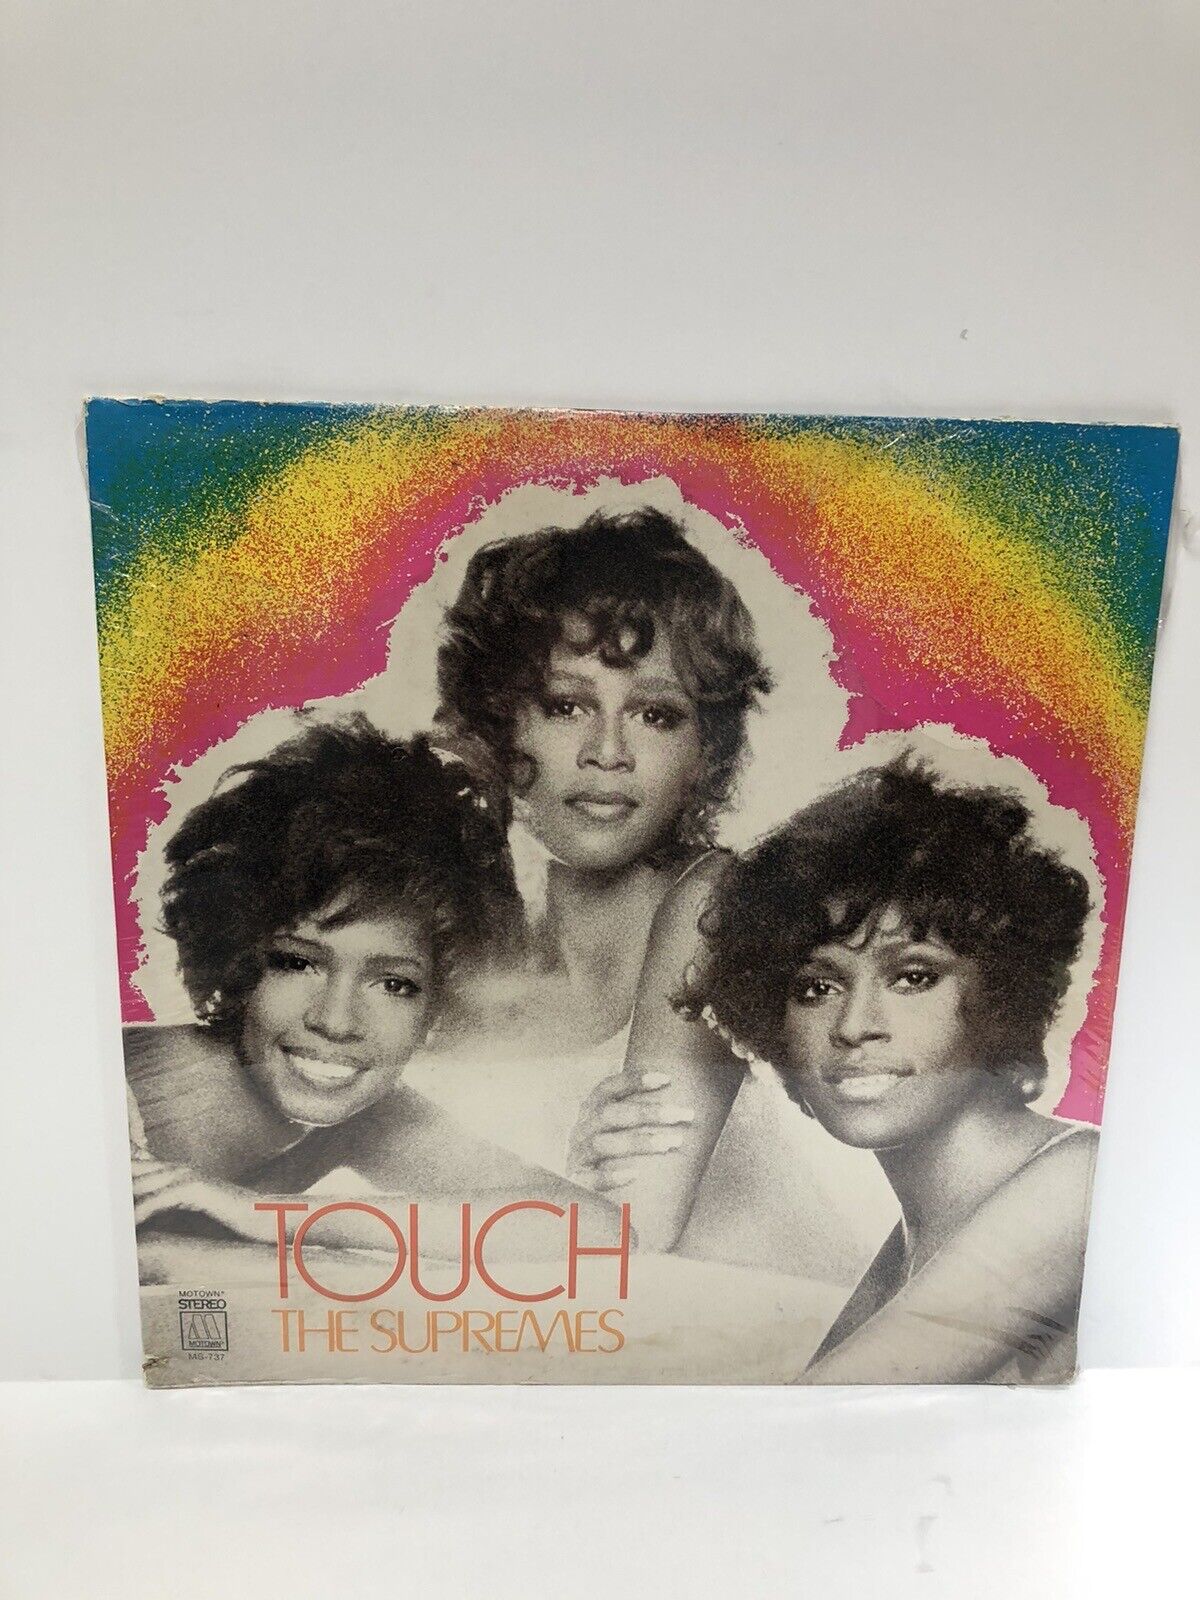 THE SUPREMES-TOUCH 12" LP MOTOWN MS-737 Funk 1971 Sealed Vinyl Mint